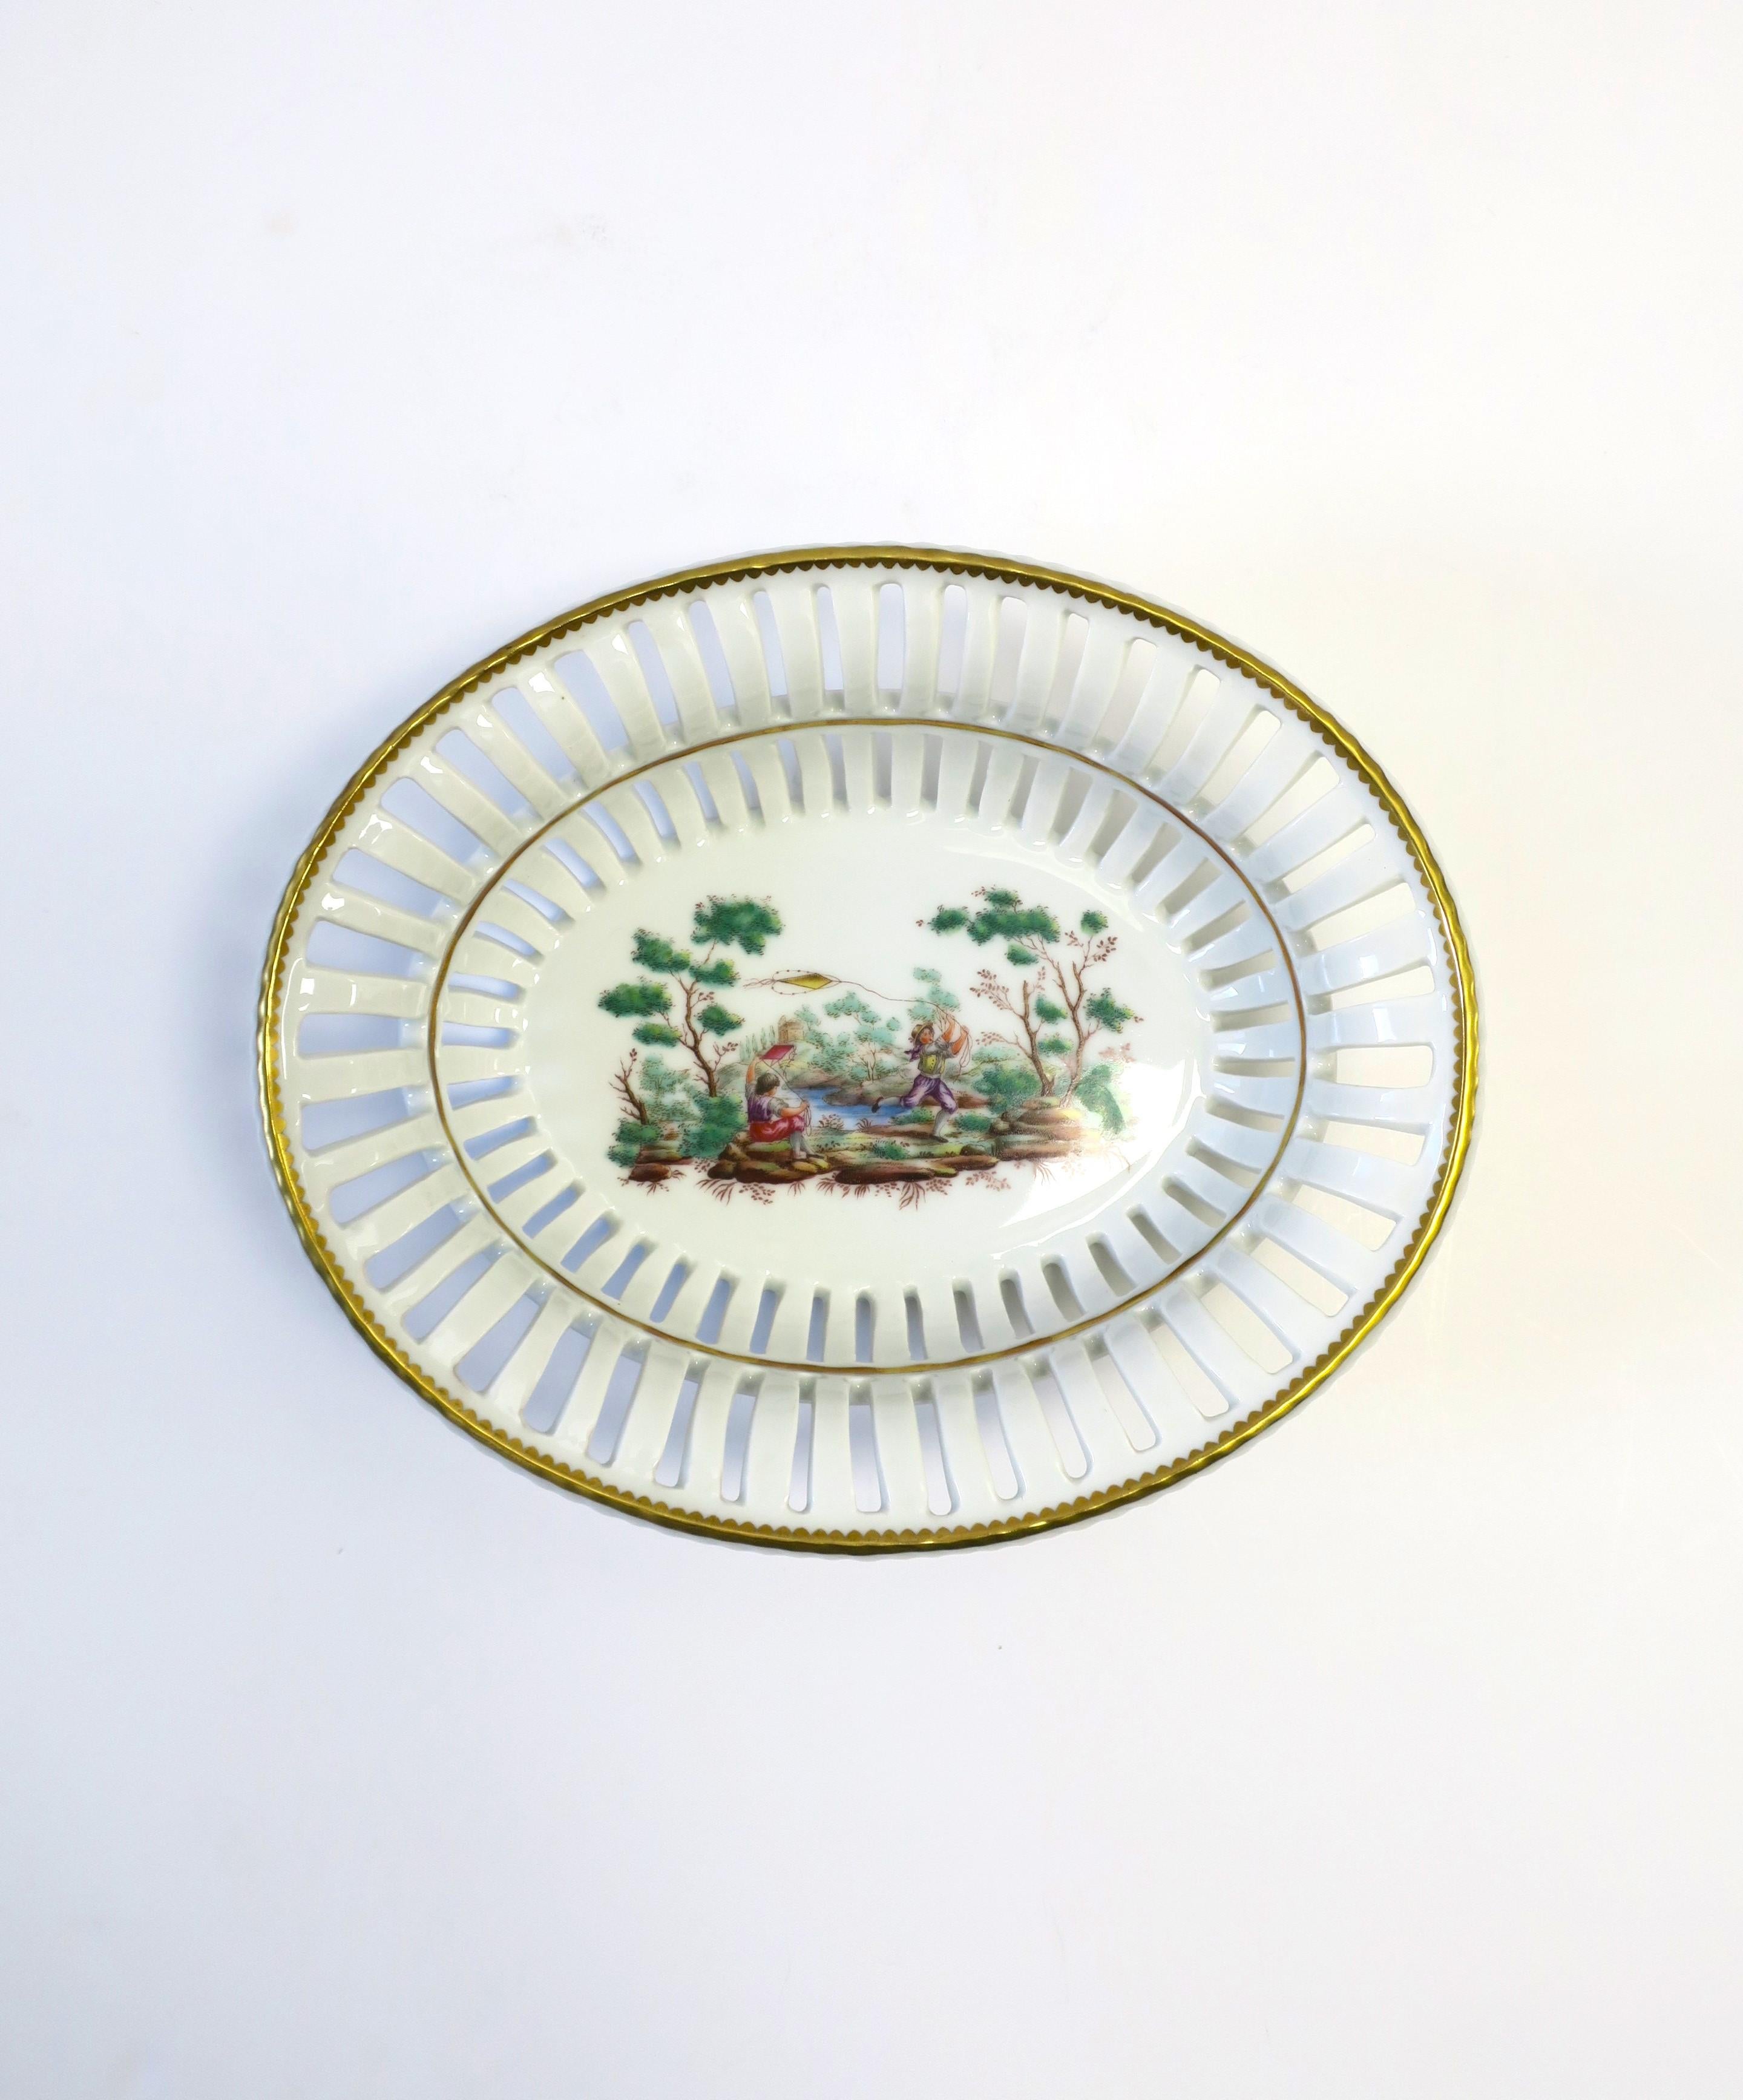 An Italian porcelain fruit or nut bowl by designer Richard Ginori, circa mid-20th century, Italy. Bowl is white porcelain, oval in shape, perforated, base scene of two boys playing with kites in countryside, edged in gold. With makers' mark on